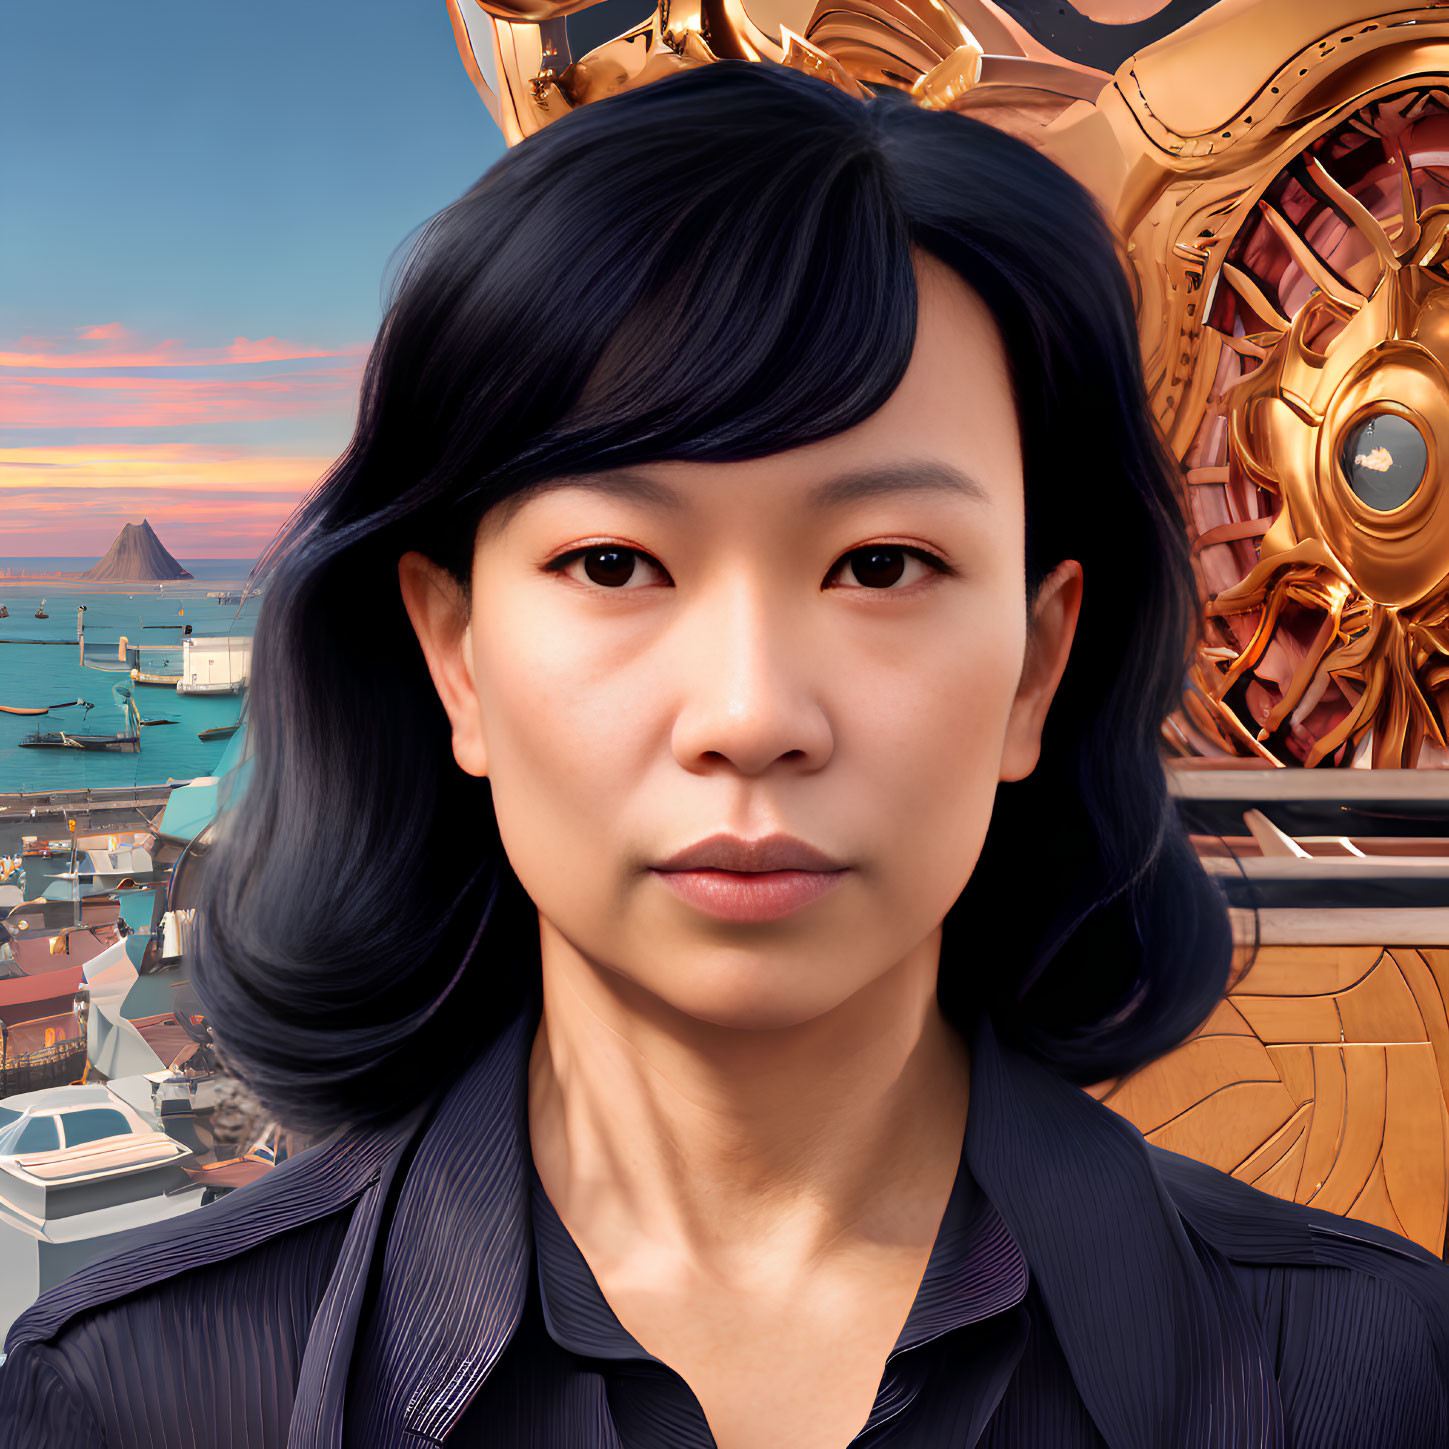 Asian woman with black hair in futuristic nautical portrait